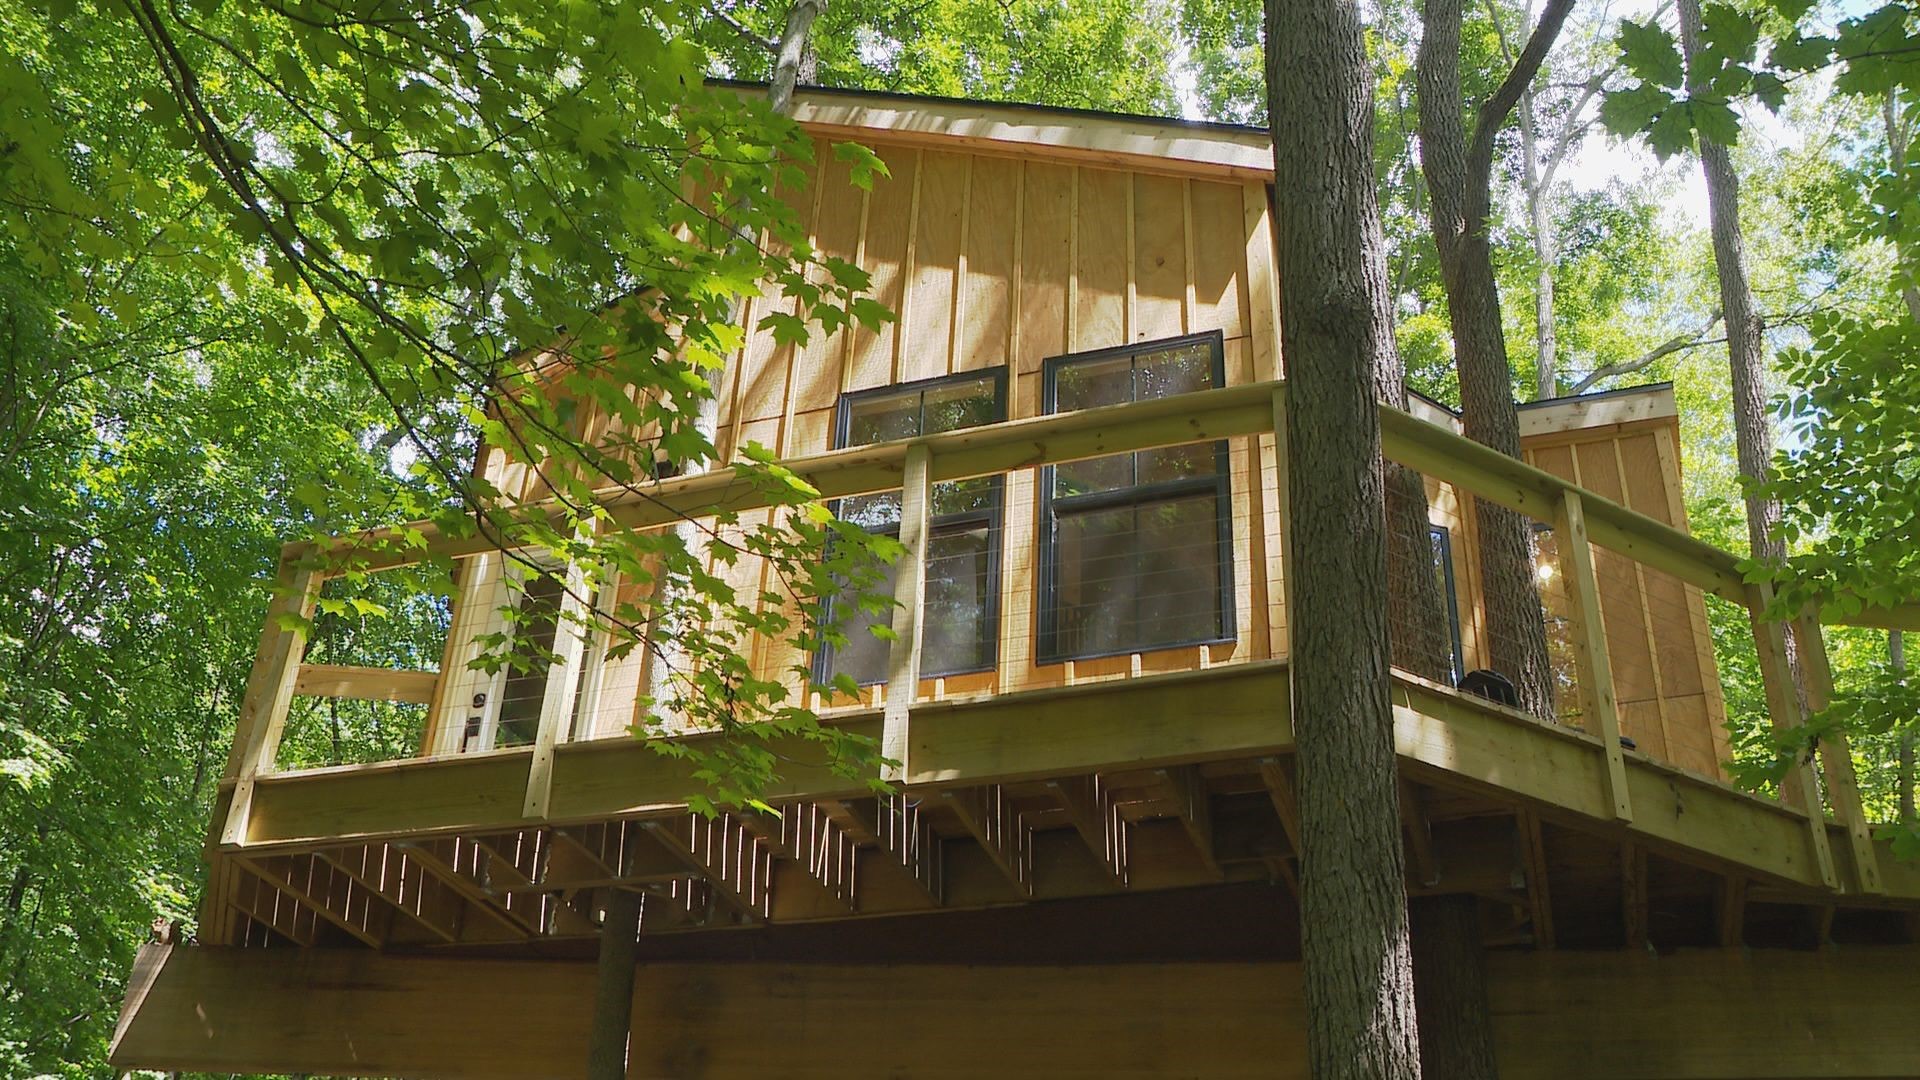 A luxury treehouse resort named Tree Vistas is open and accepting bookings.